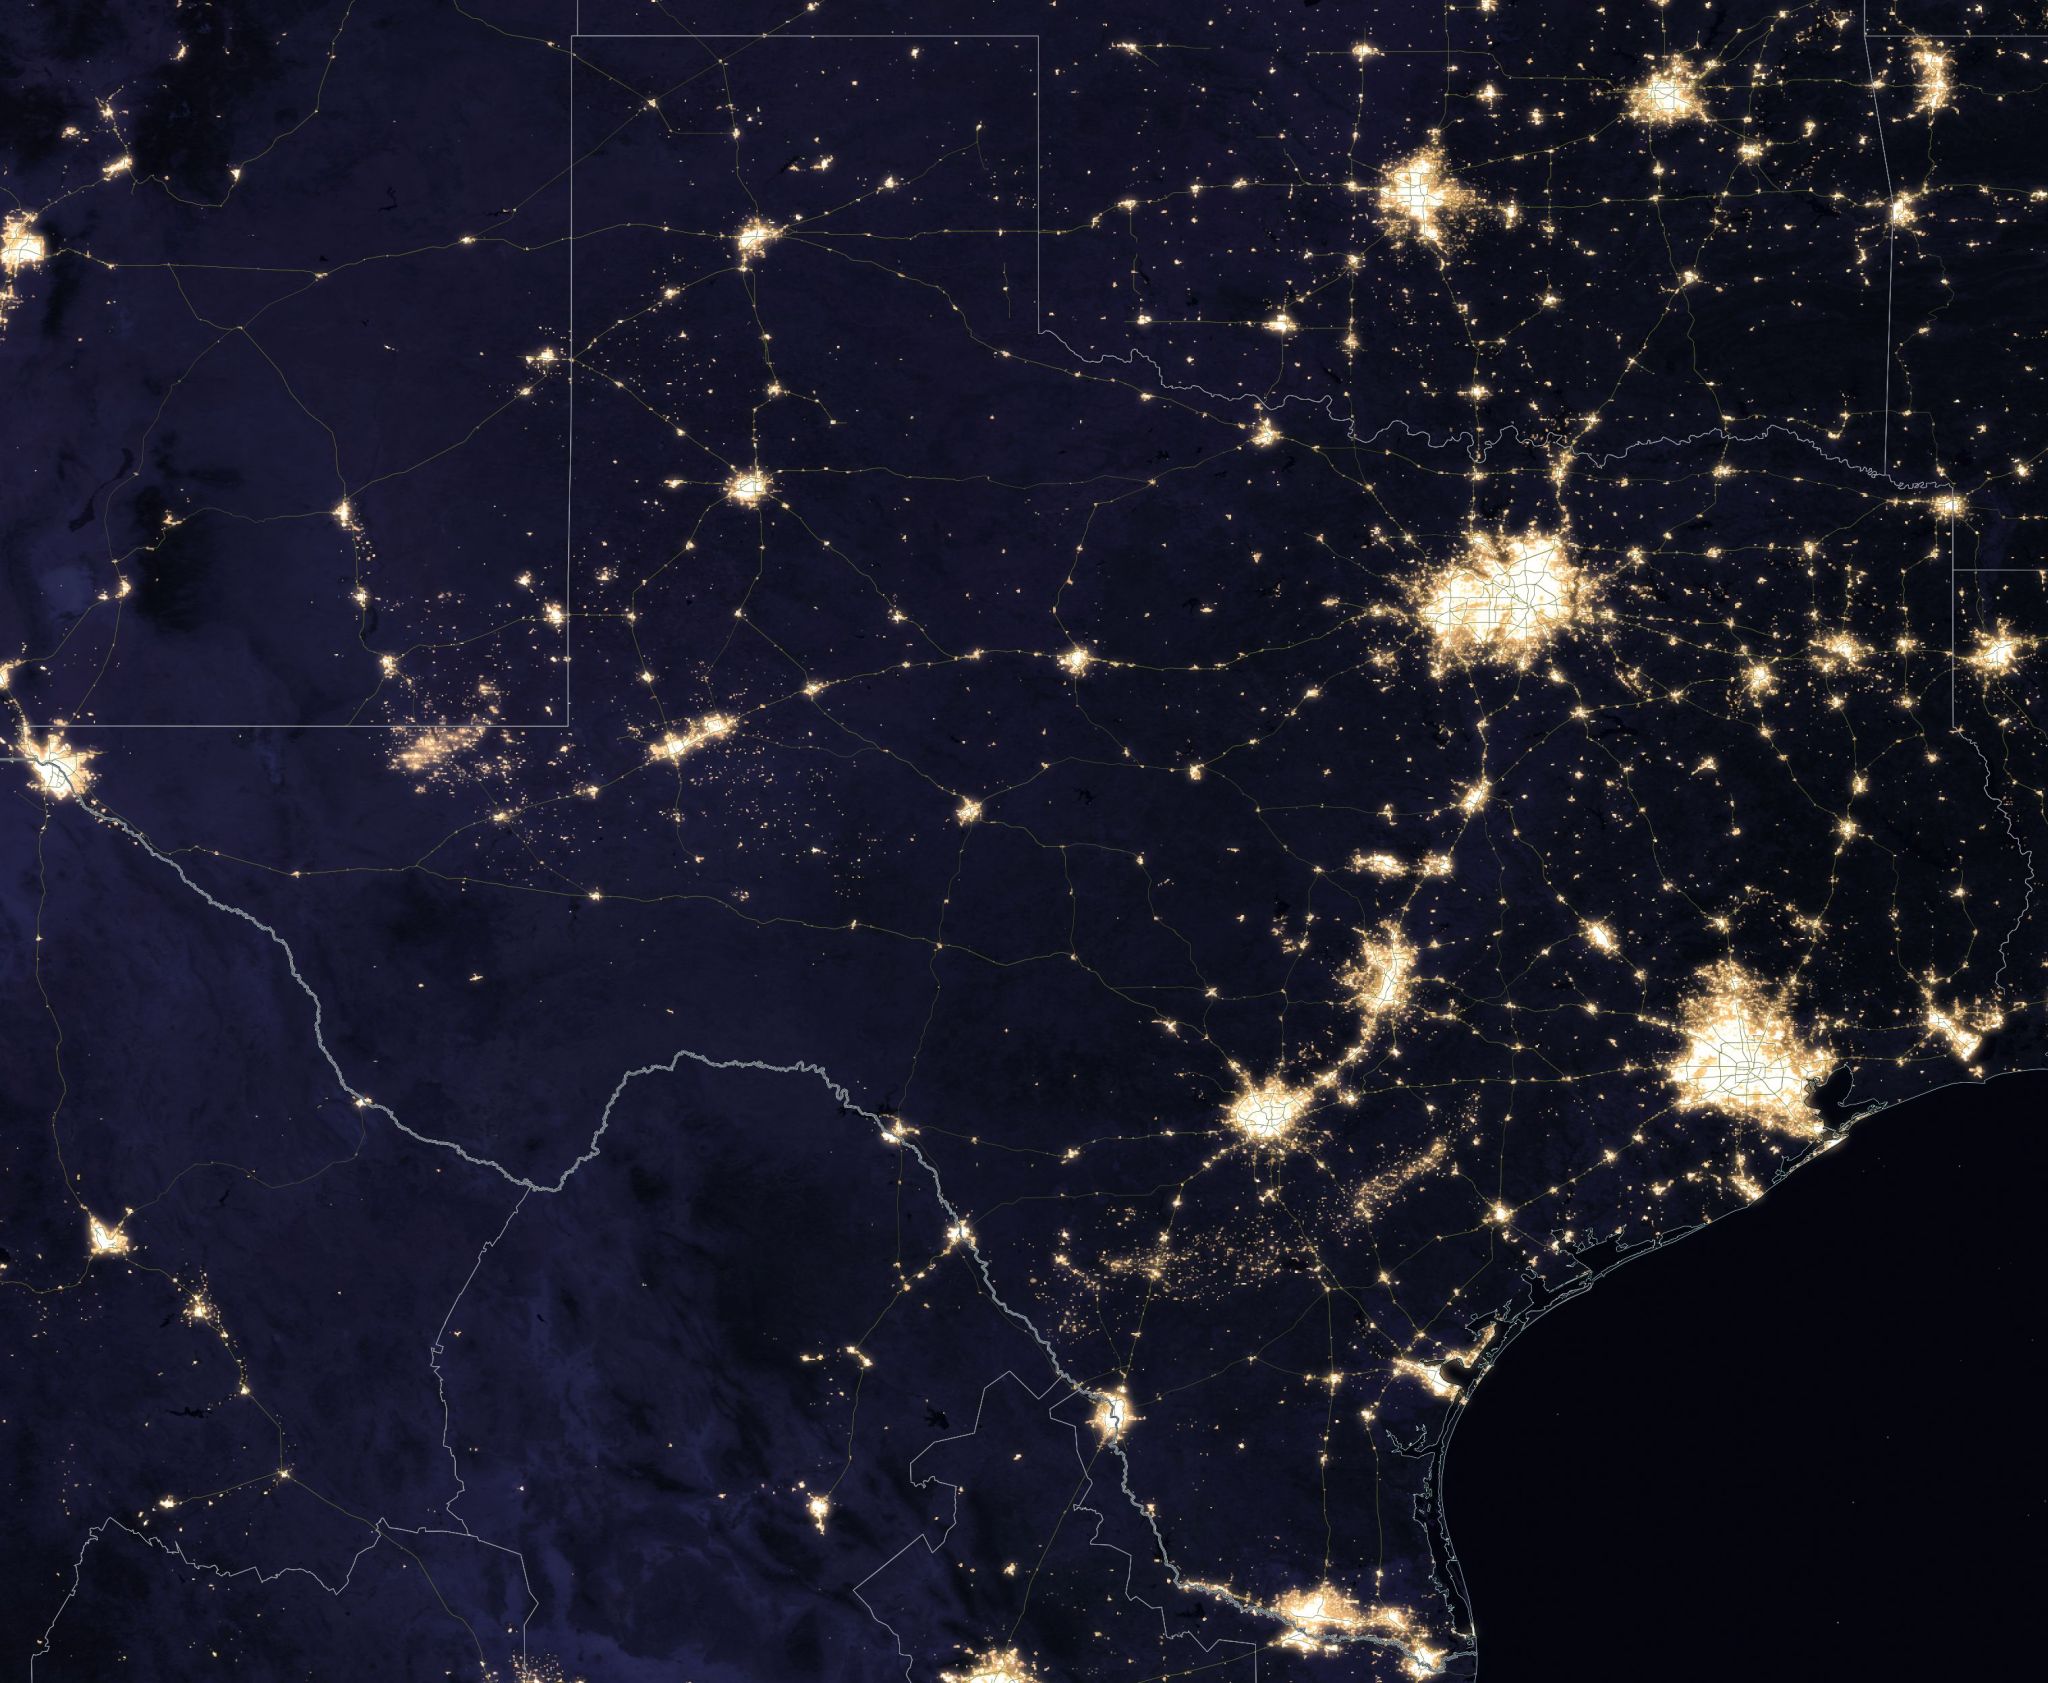 New NASA images show Texas at night clearer than ever